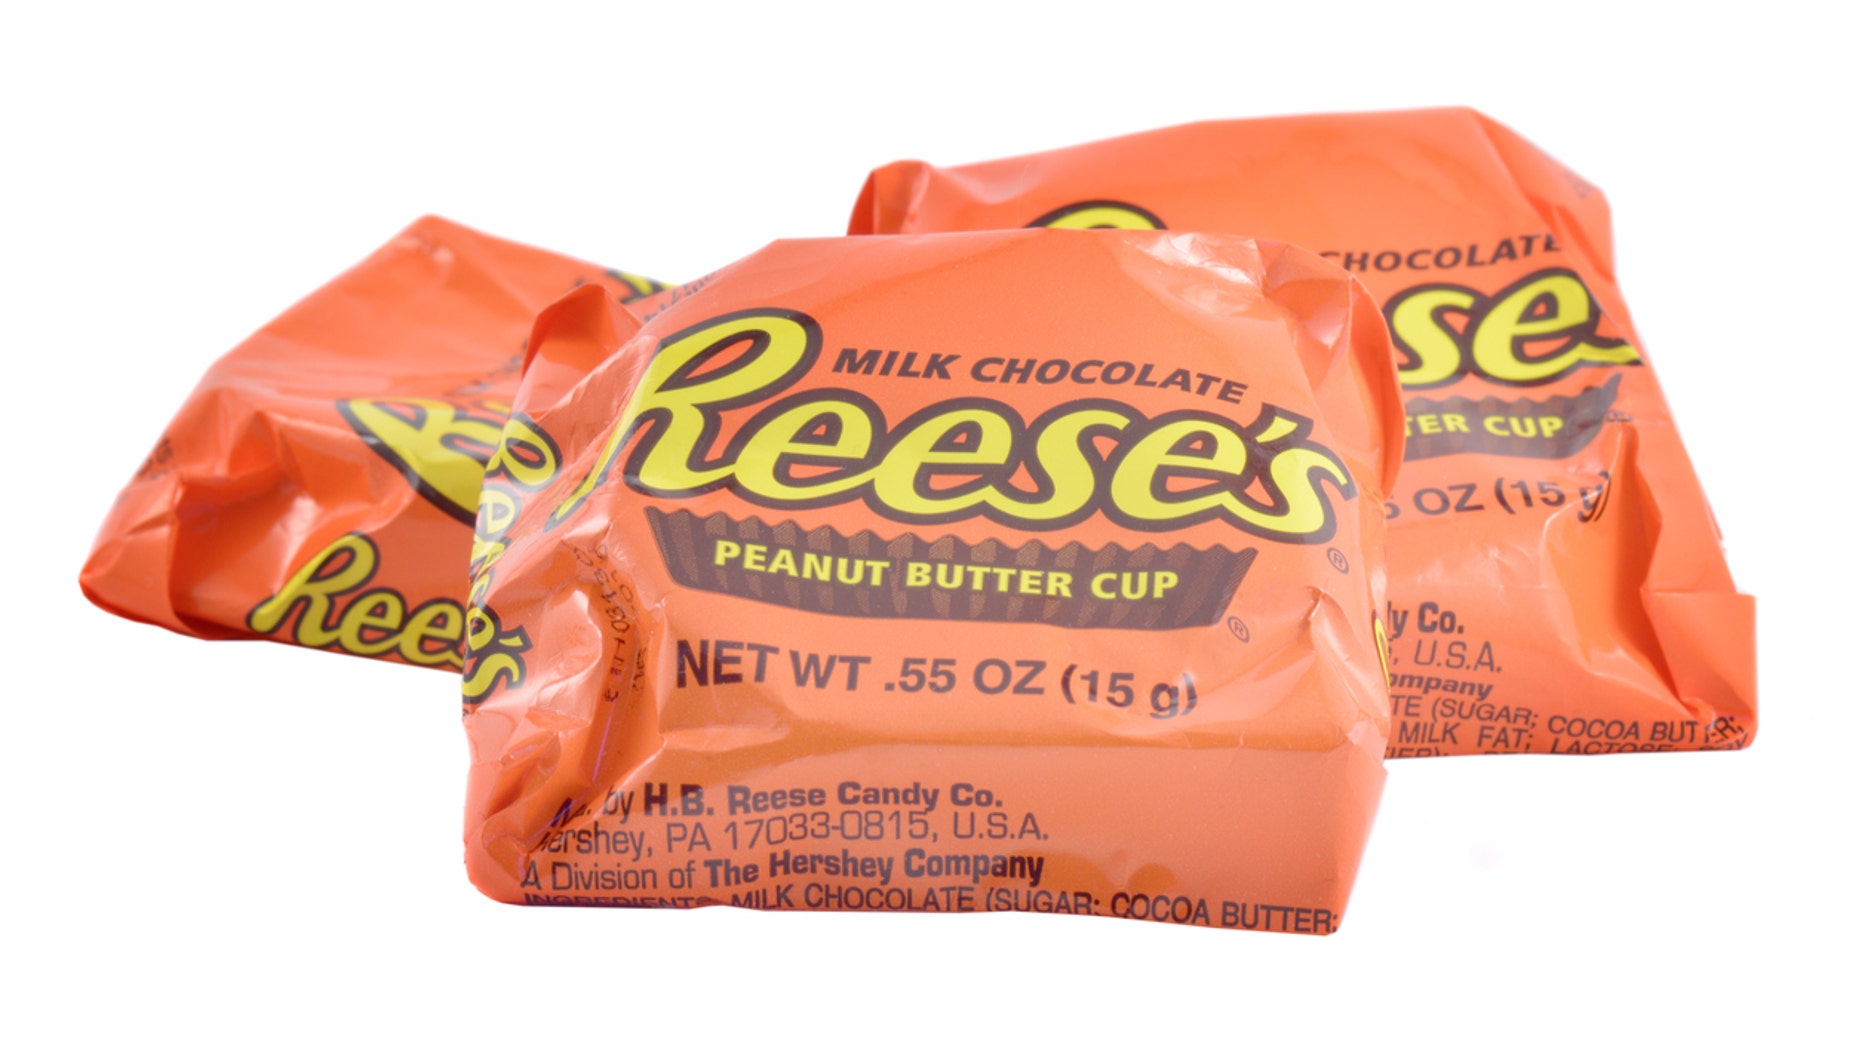 Reese’s Peanut Butter Cups are preferred by the majority of Americans polled with more than 36 percent rating the sweet-and-salty treat as their favorite.